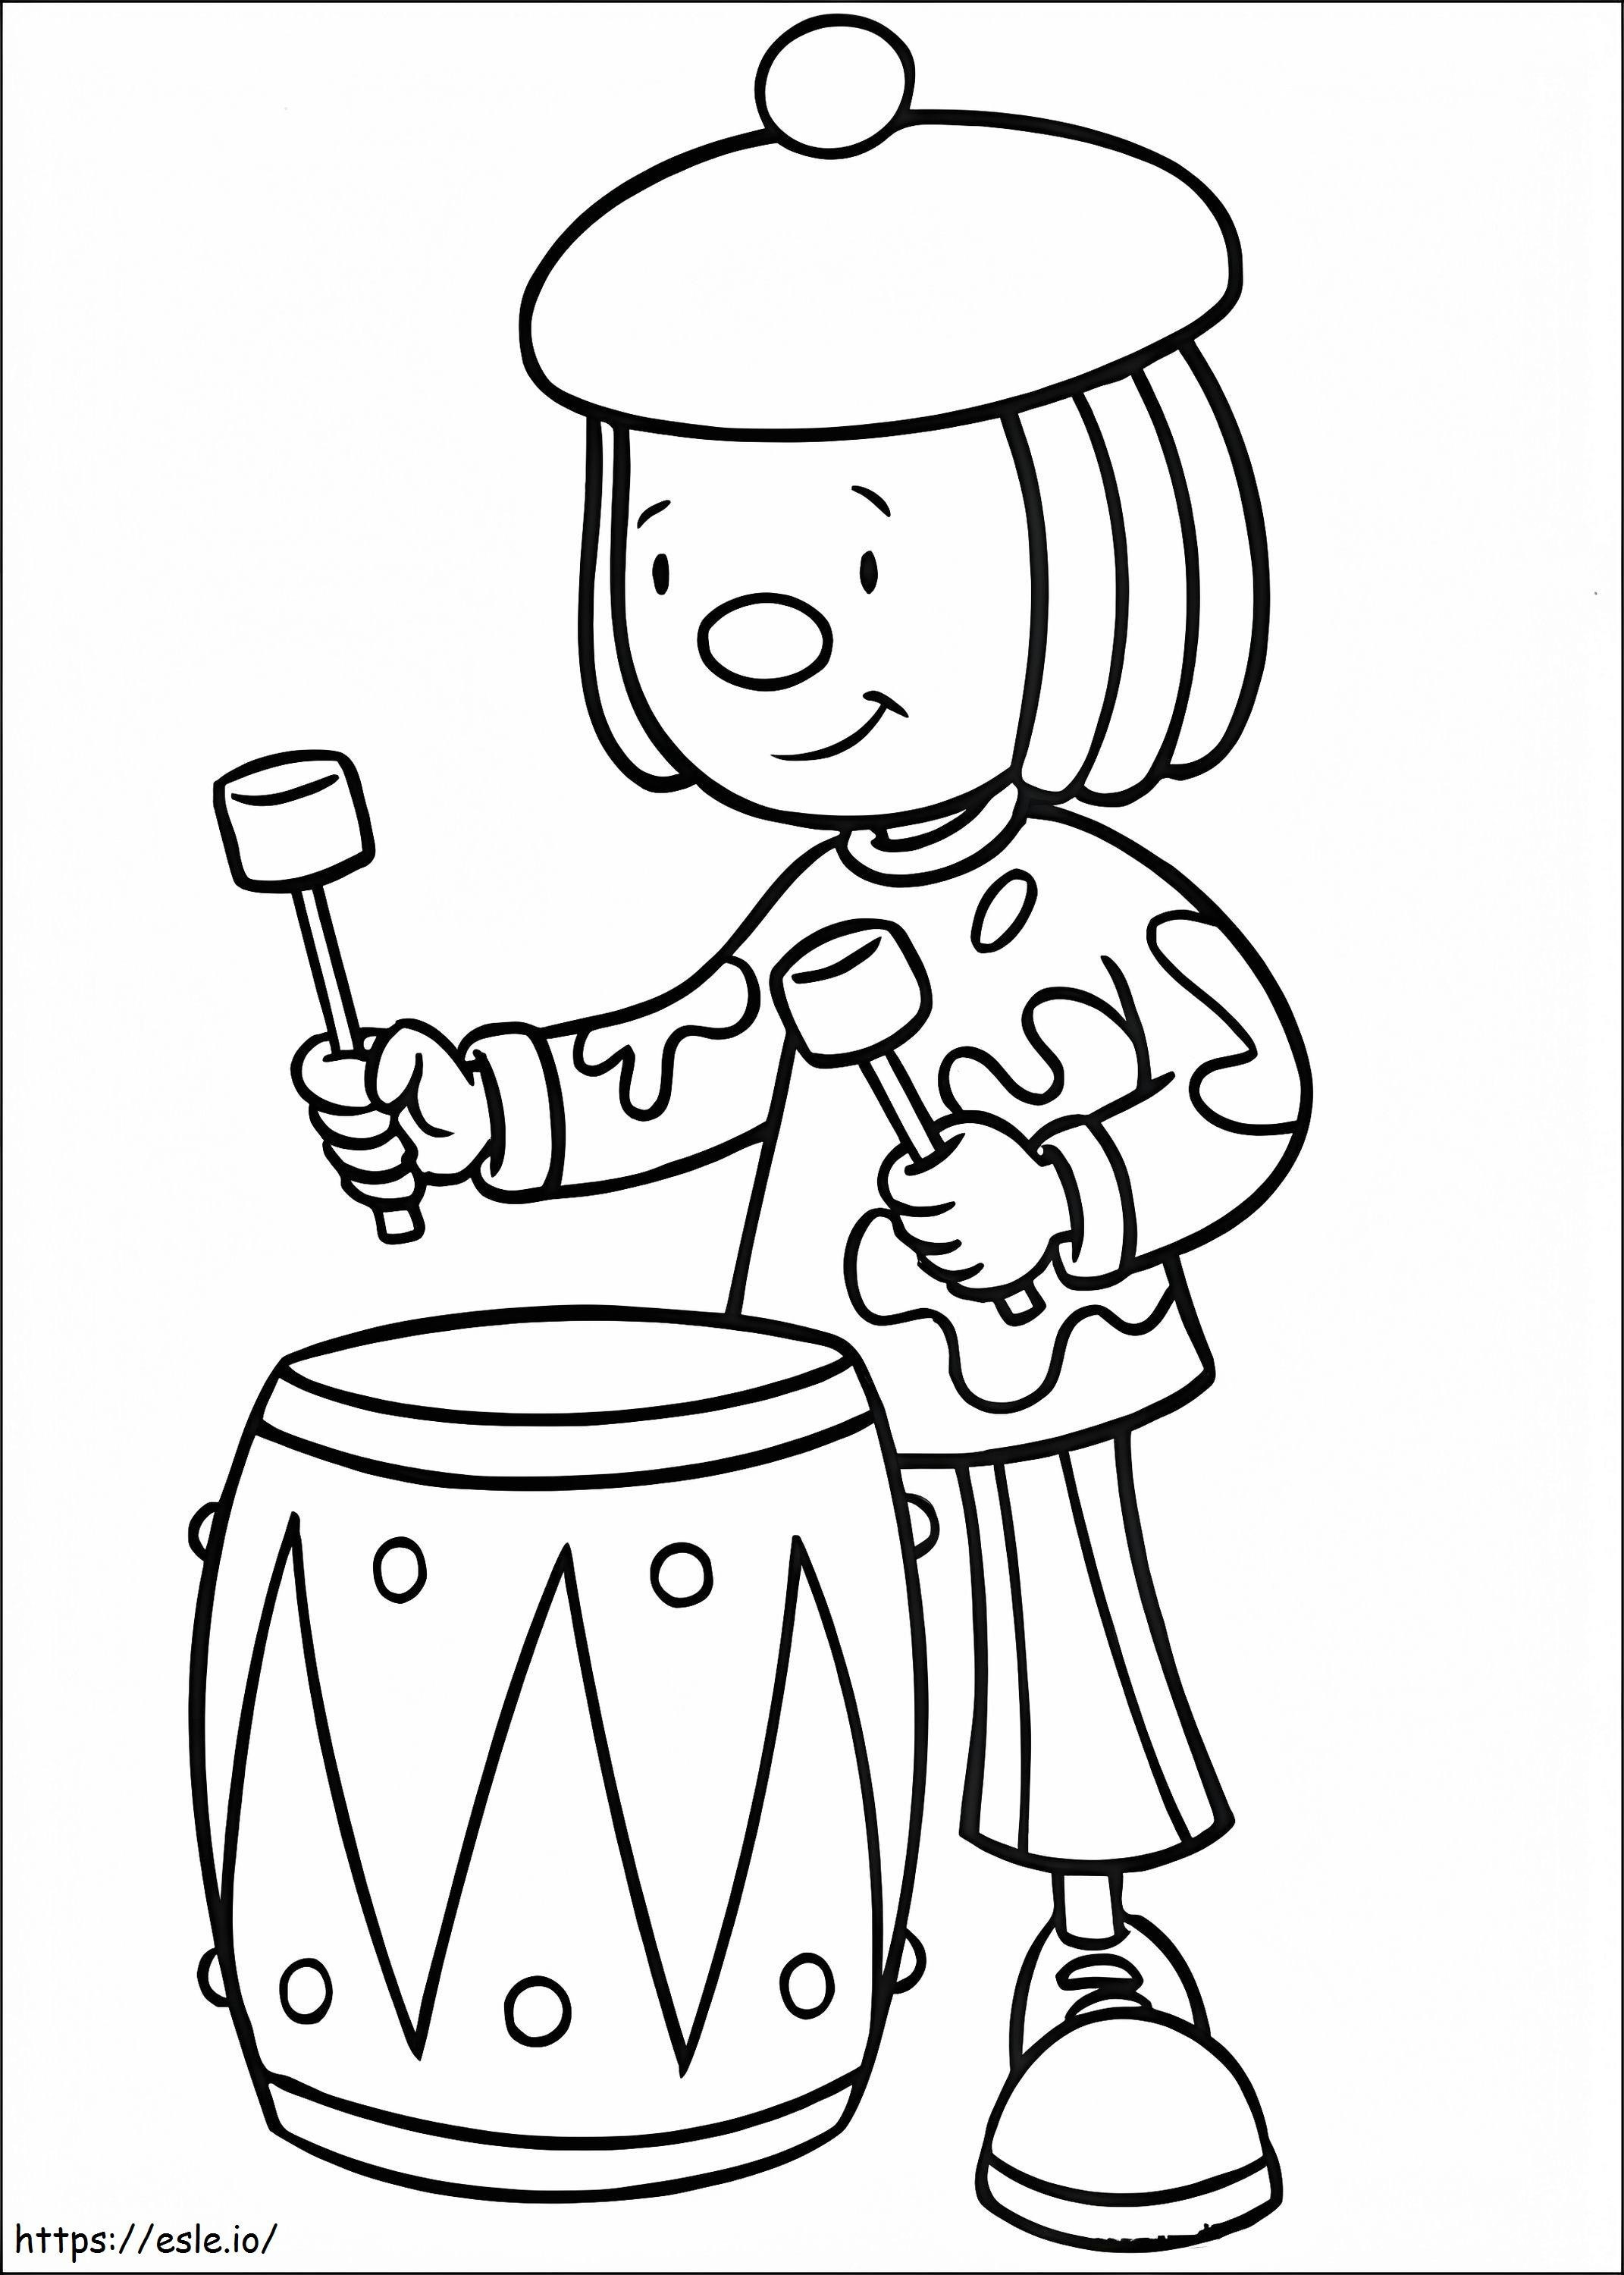 JoJo Tickle Playing Drum coloring page